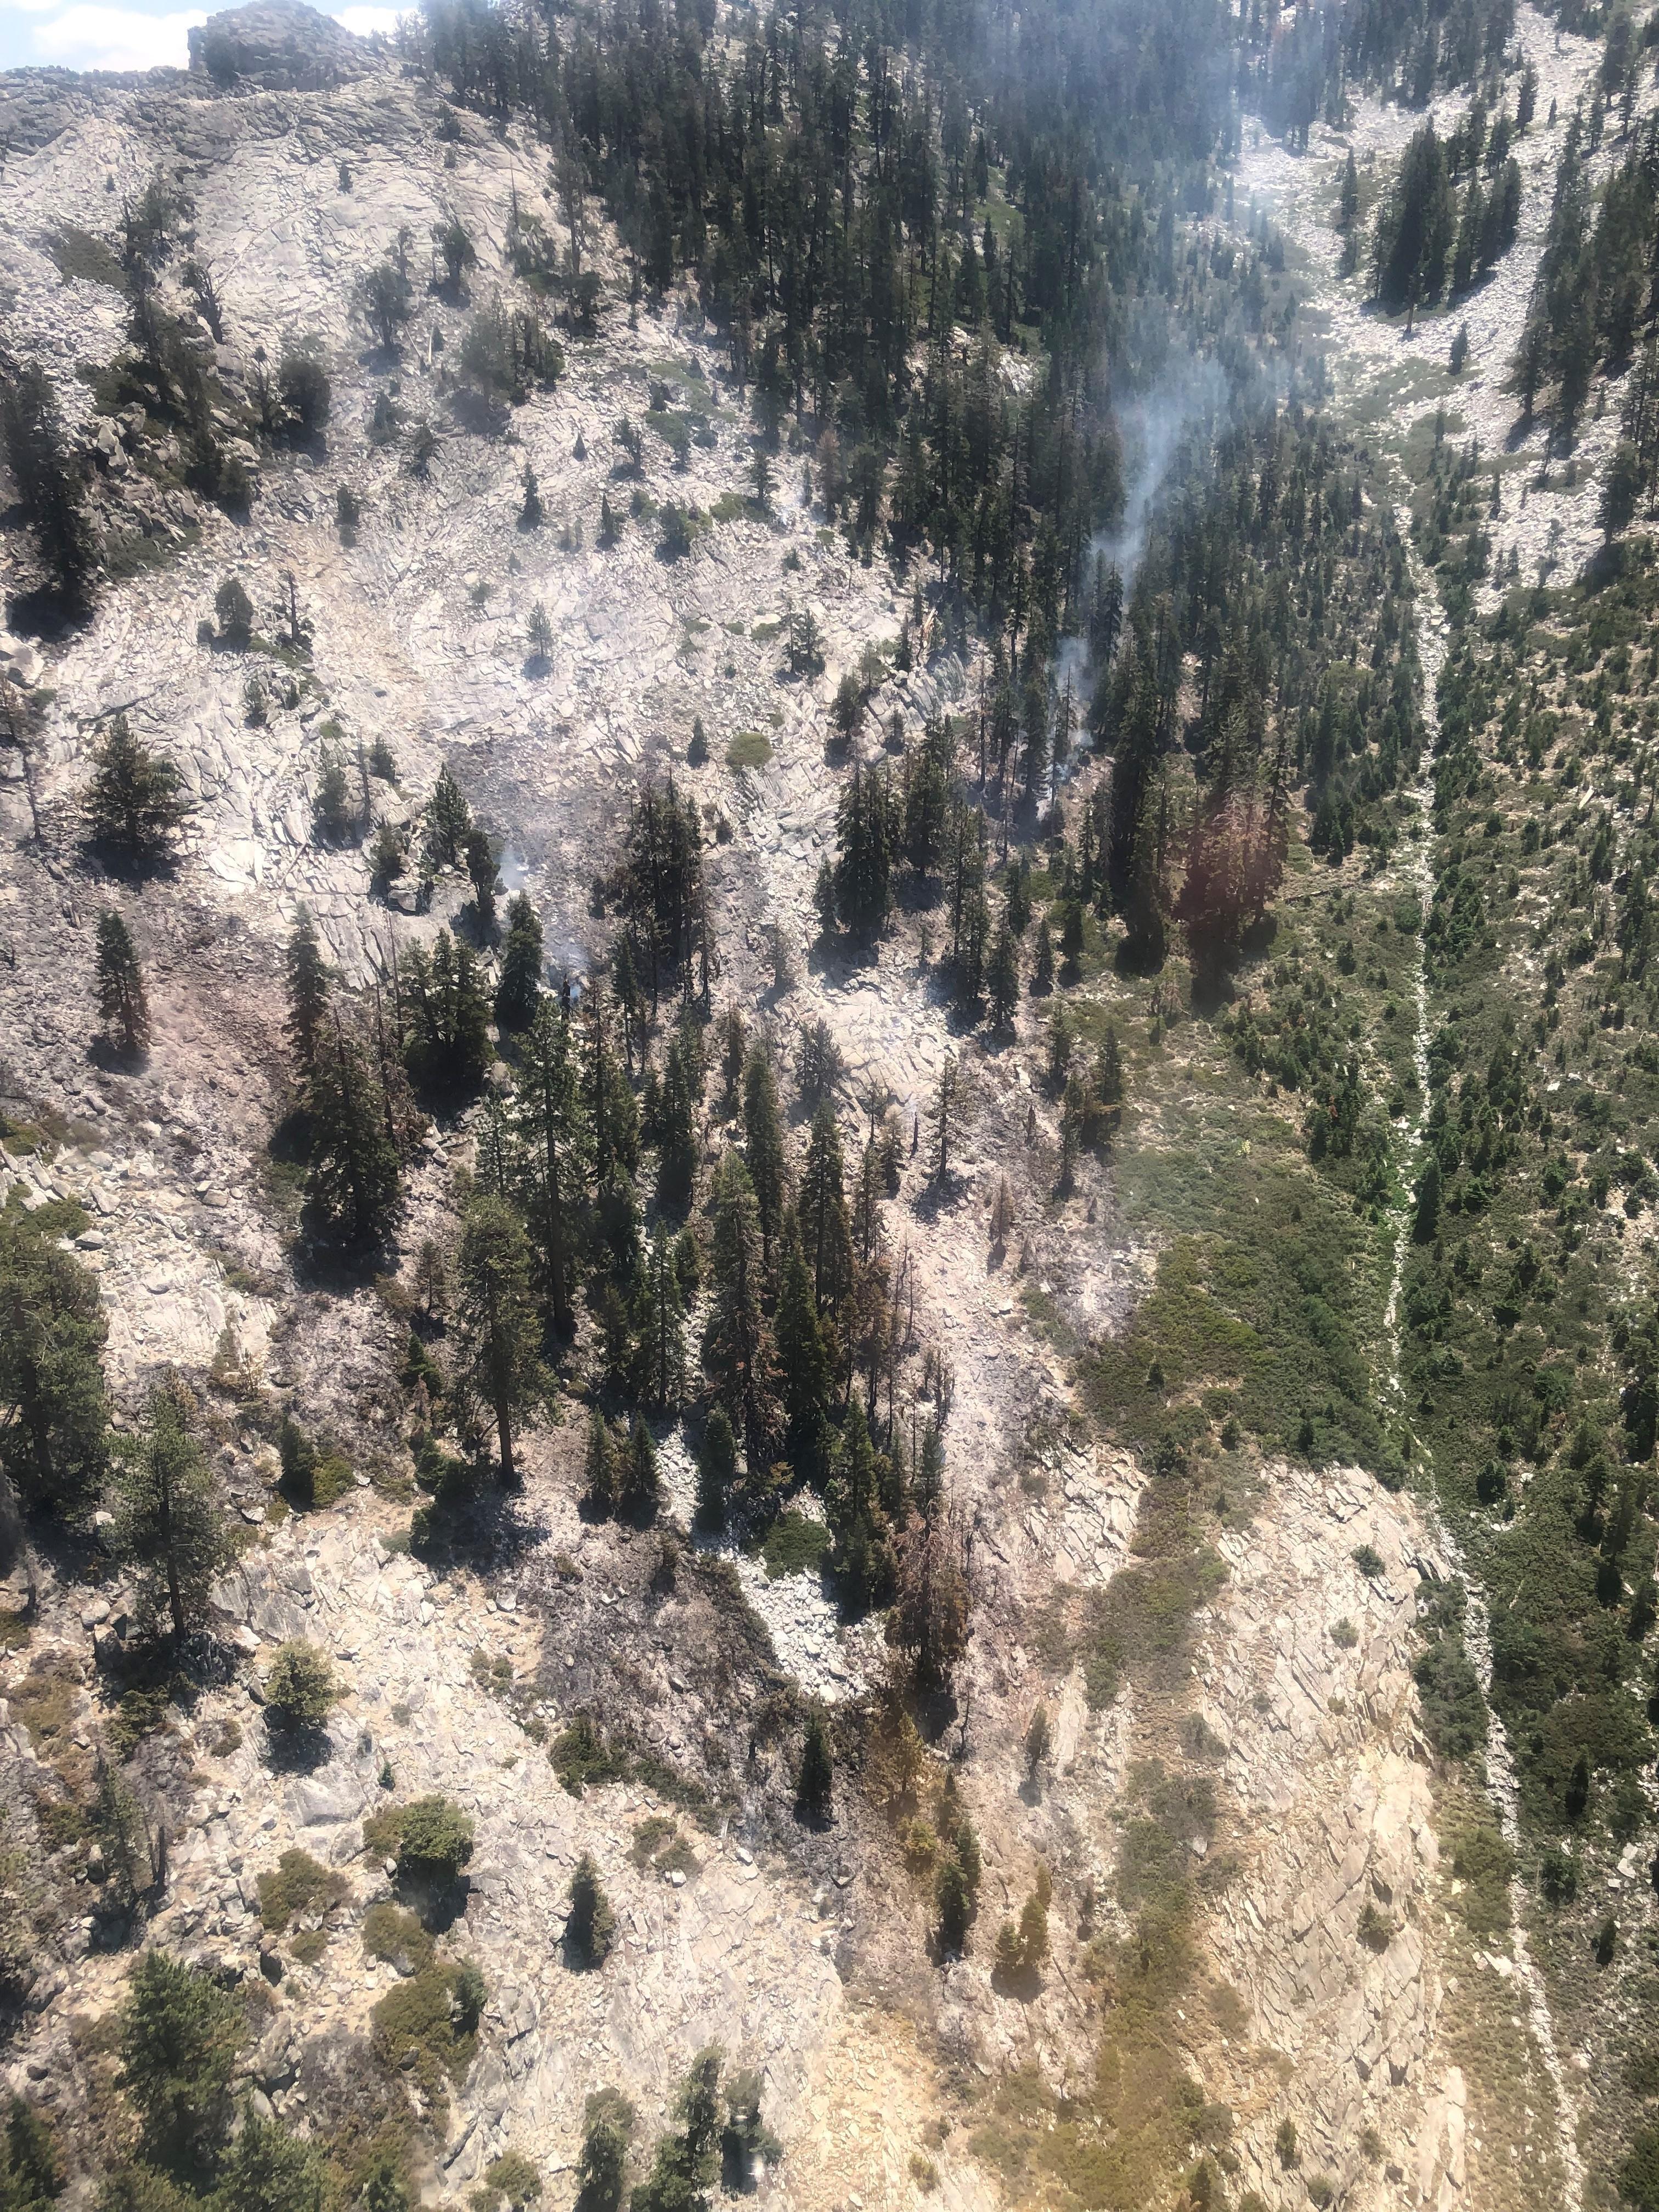 The fire shows slow movement up slope up canyon towards Avalanche Peak.  The fire remains to the east of the no name drainage / rock chute